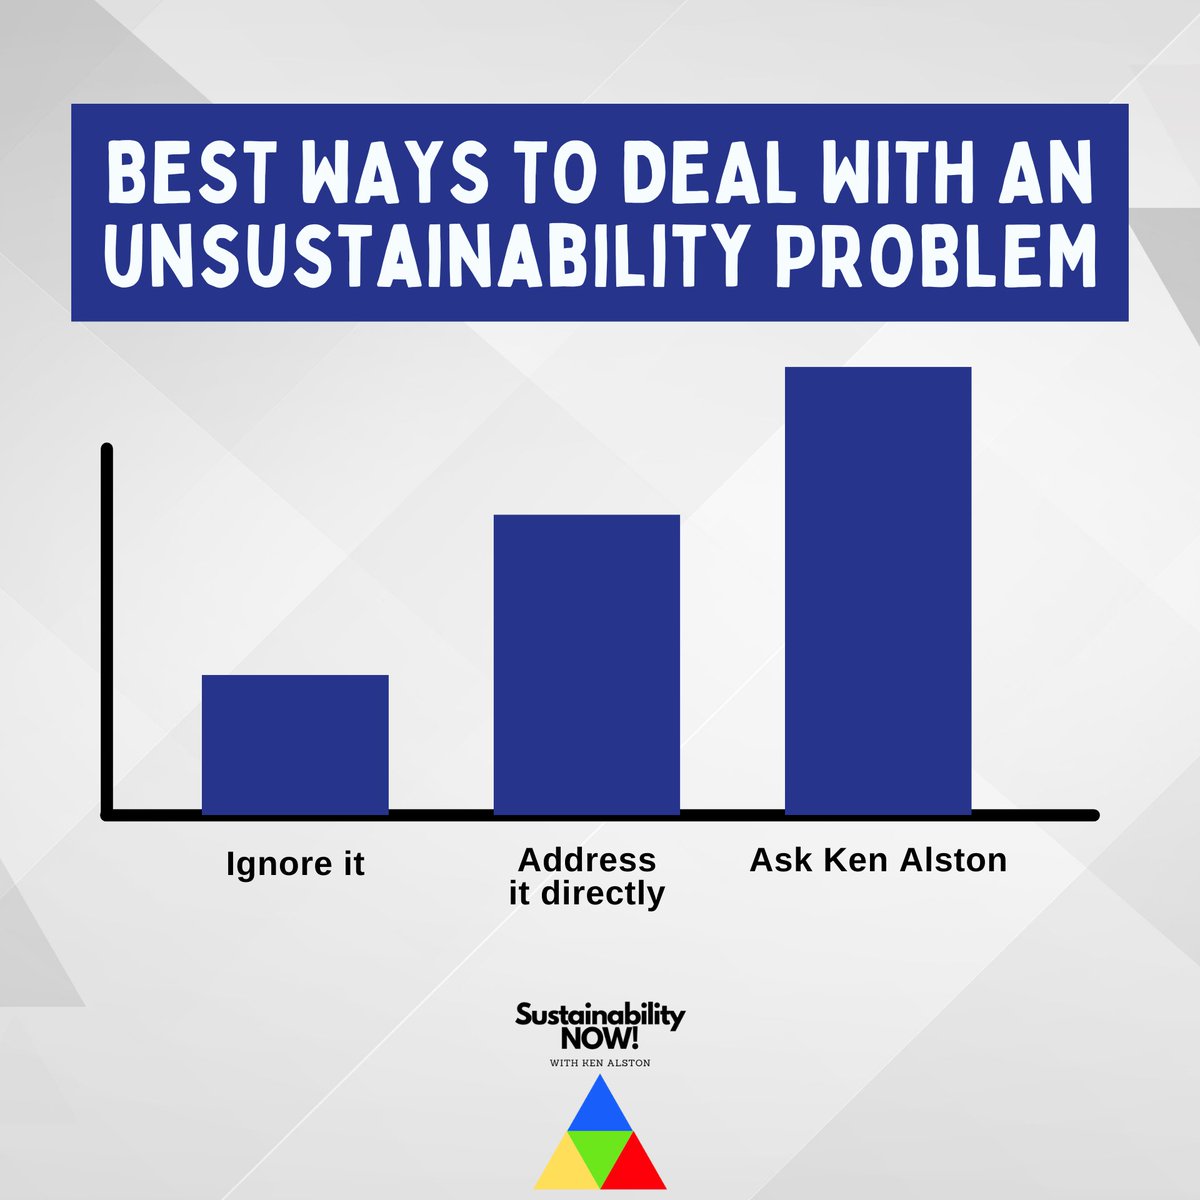 Subscribe to my 'SustainabilityNOW!' YouTube Channel for the best ways to deal with unsustainability.

smpl.is/904kf

#SustainabilityNOW #sustainabilitytips #youtubesustainability #environmentalawareness #sustainableliving #savetheplanet